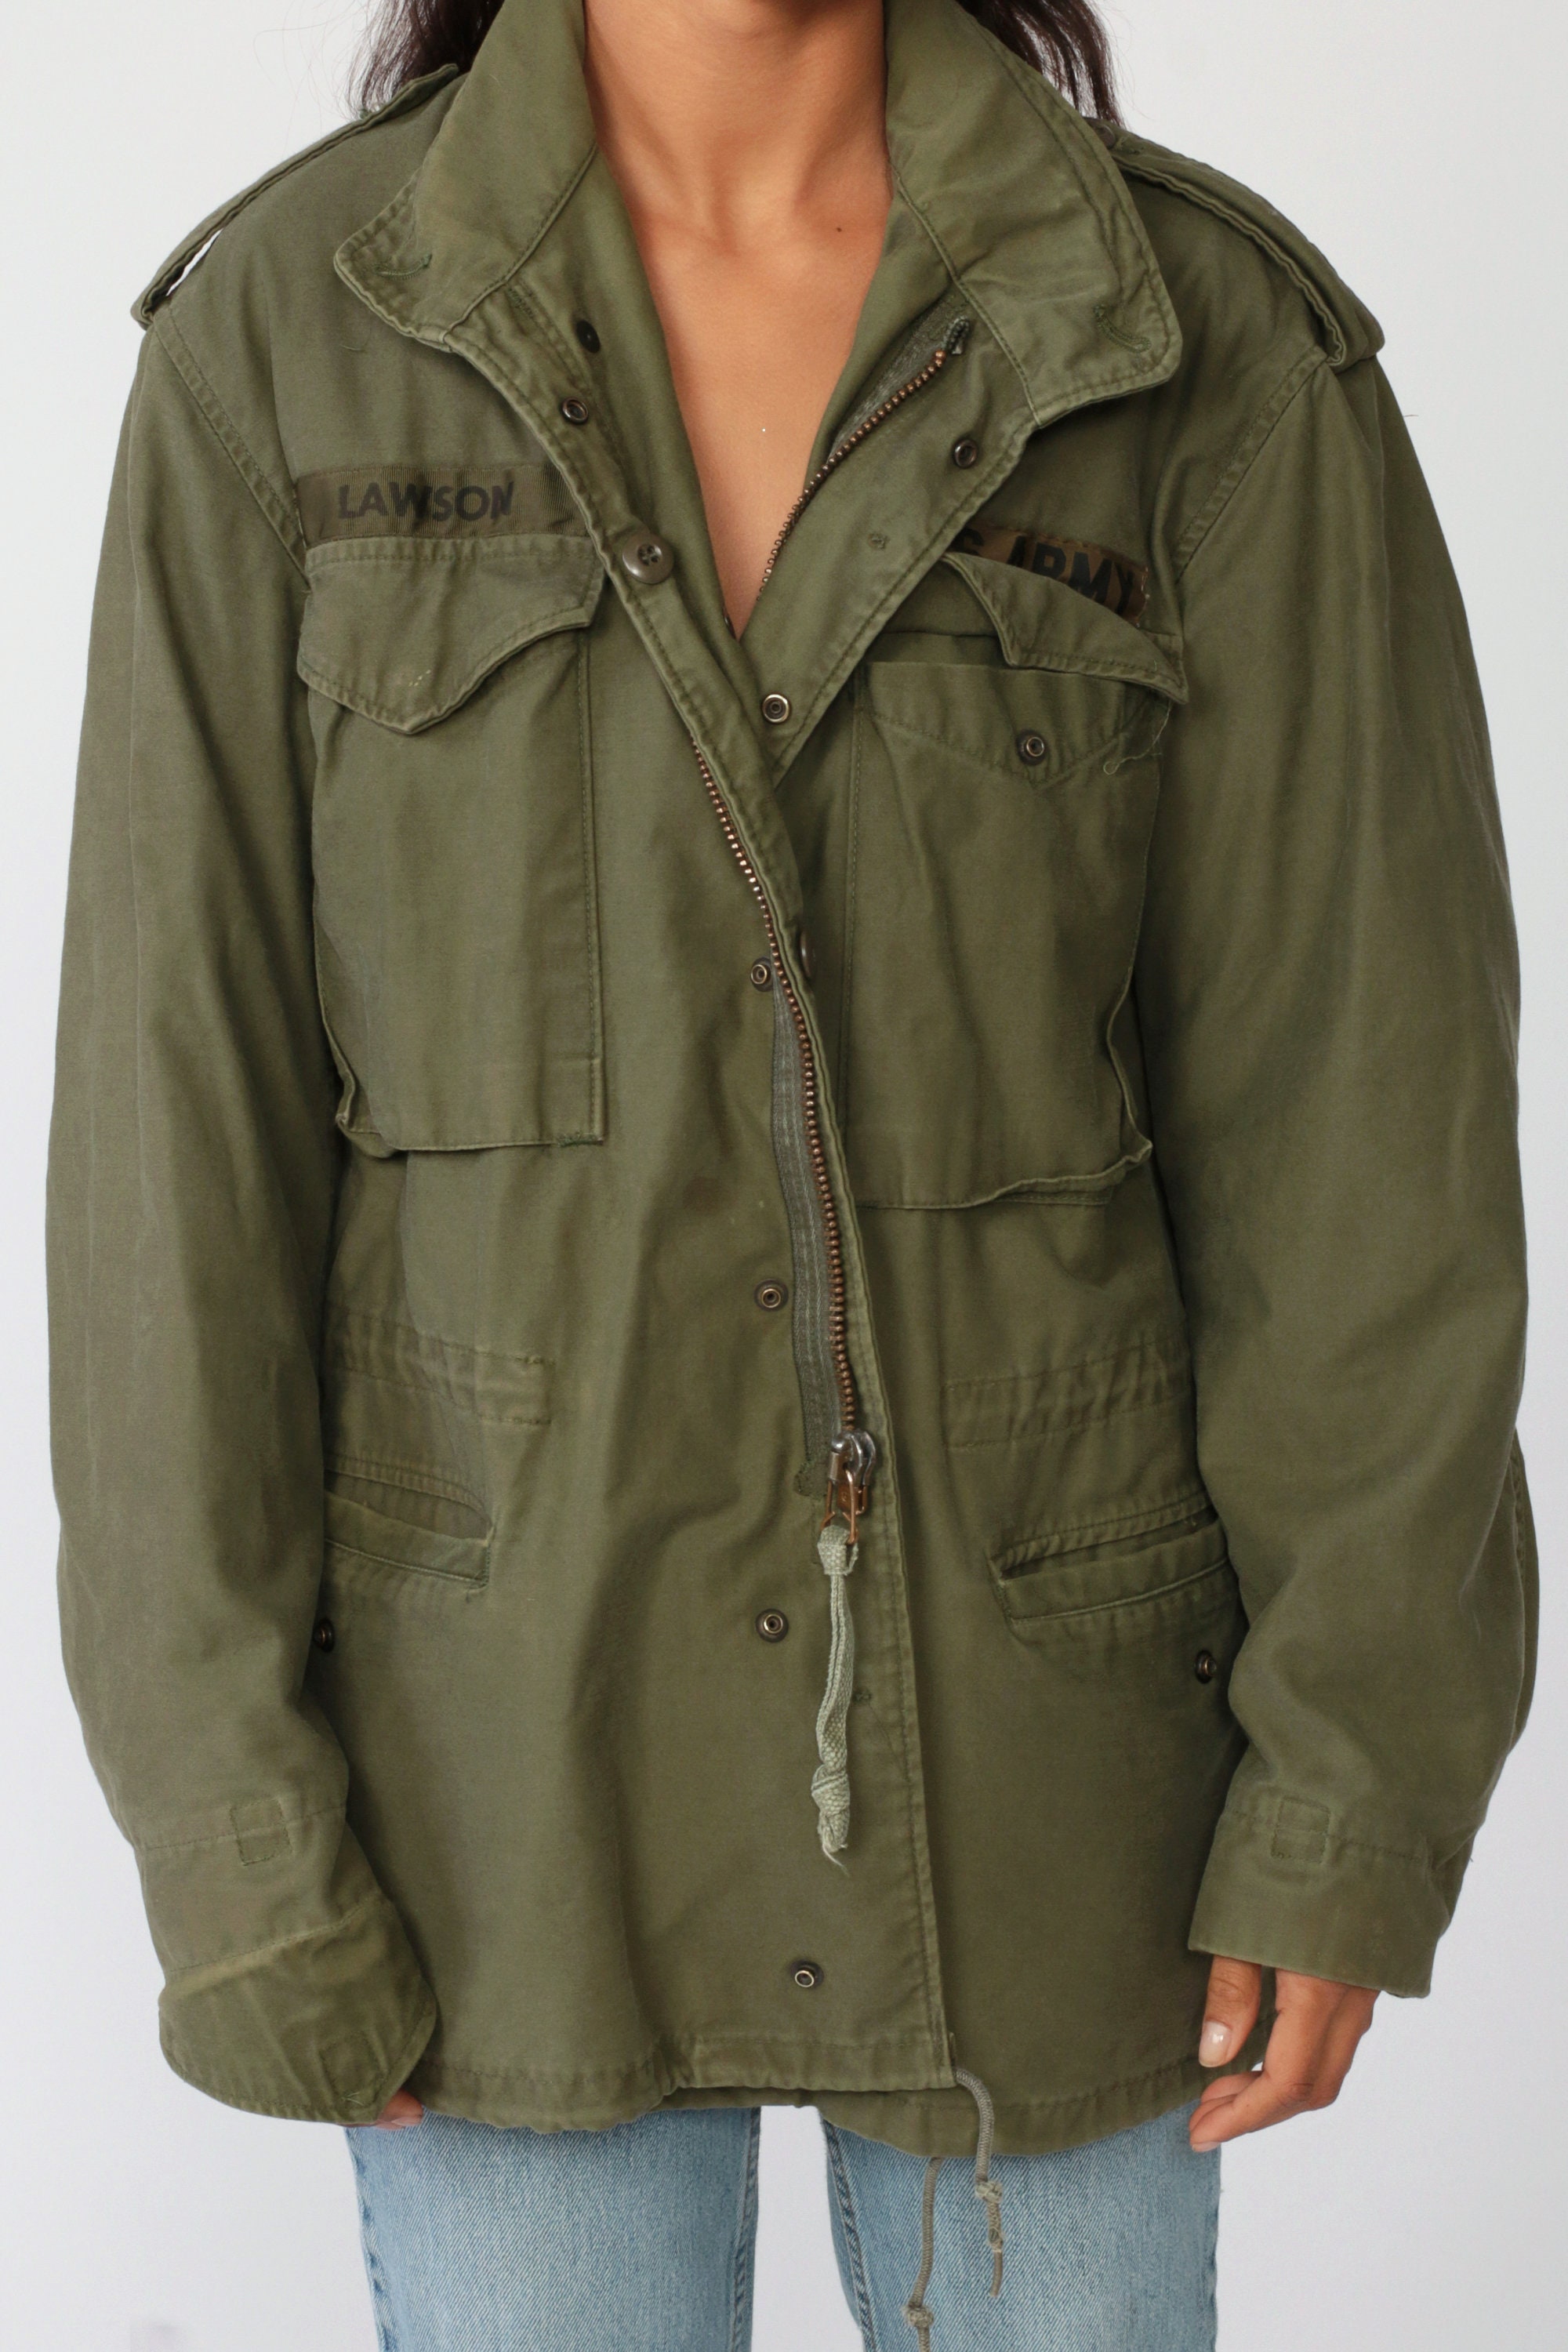 Mens Army Green Coat - Army Military